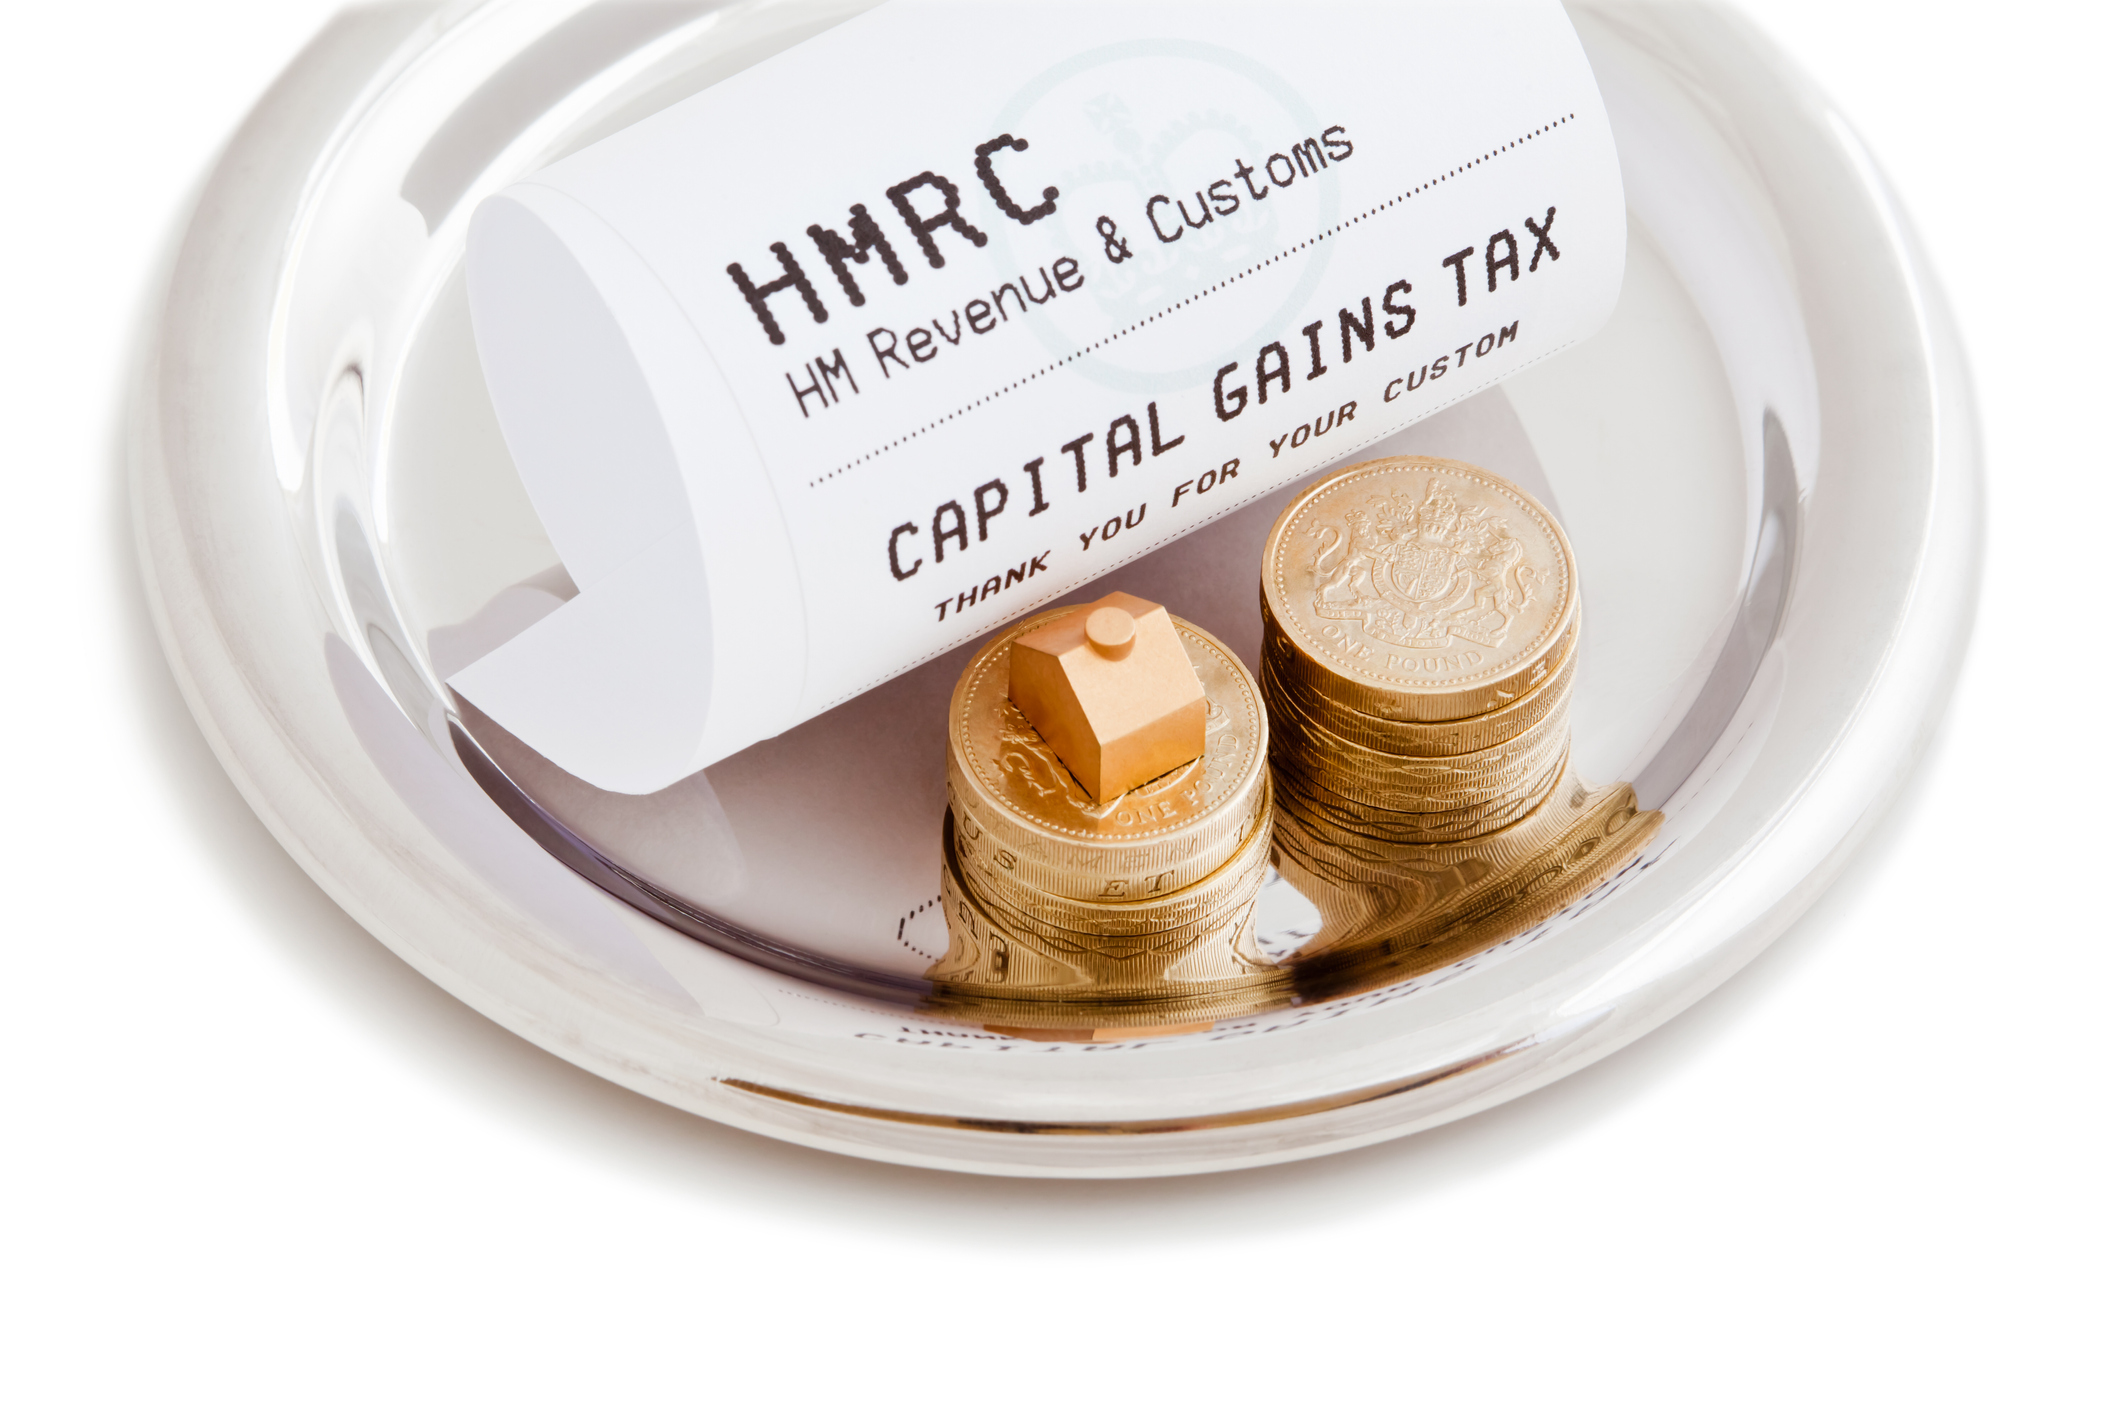 Receipt from HMRC reading Capital Gains Tax